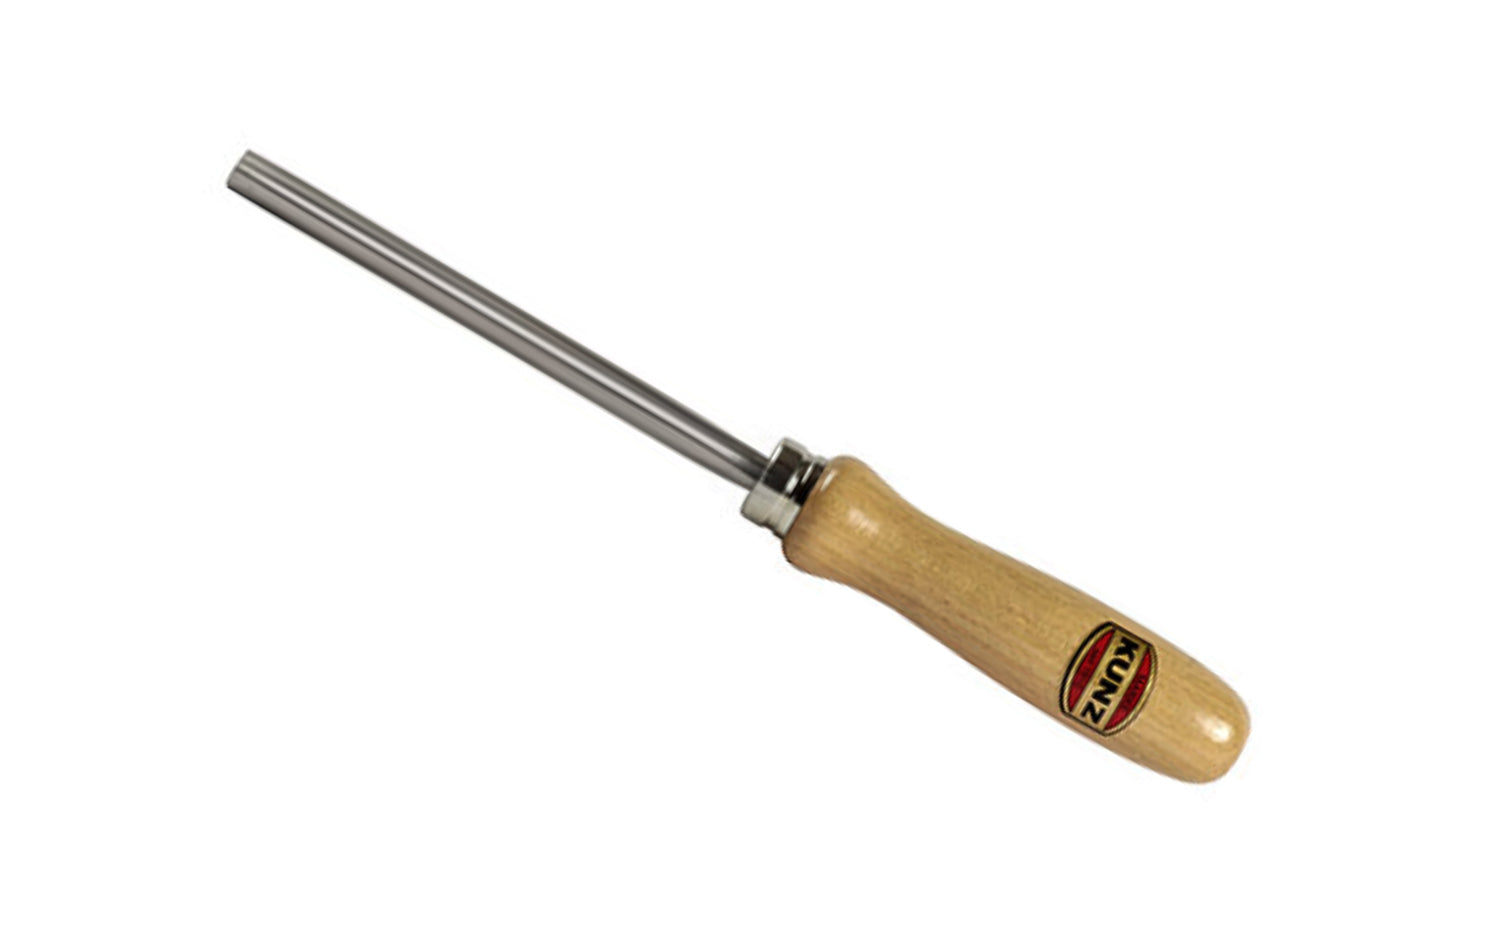 Kunz Round Burnisher ~ Model No. 124 ~ 4-1/4" long round blade ~ Hardened blade ~ 8-3/4" long overall length ~ Important tool for final step of preparing a cabinet scraper